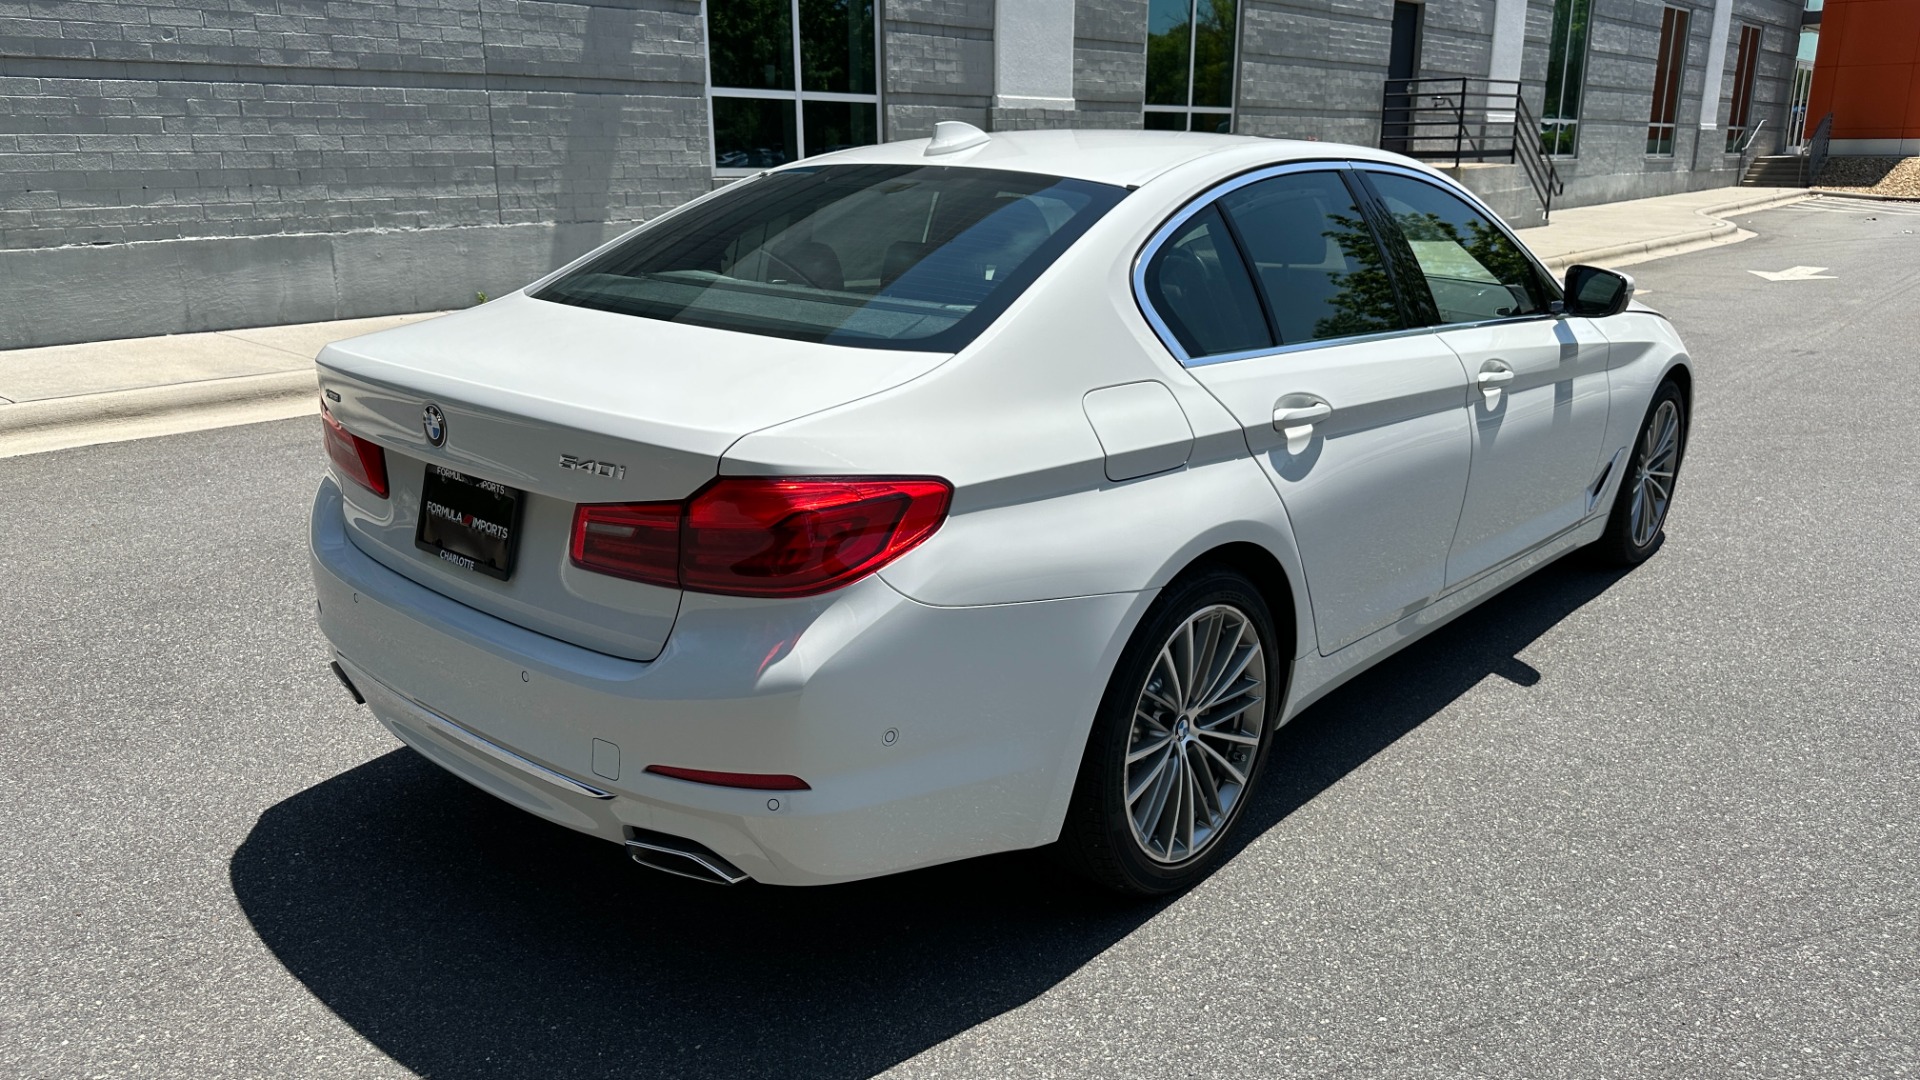 Used 2020 BMW 5 Series 540i xDrive / EXECUTIVE / LUXURY / HK SURROUND / NAPPA LEATHER for sale $45,995 at Formula Imports in Charlotte NC 28227 7